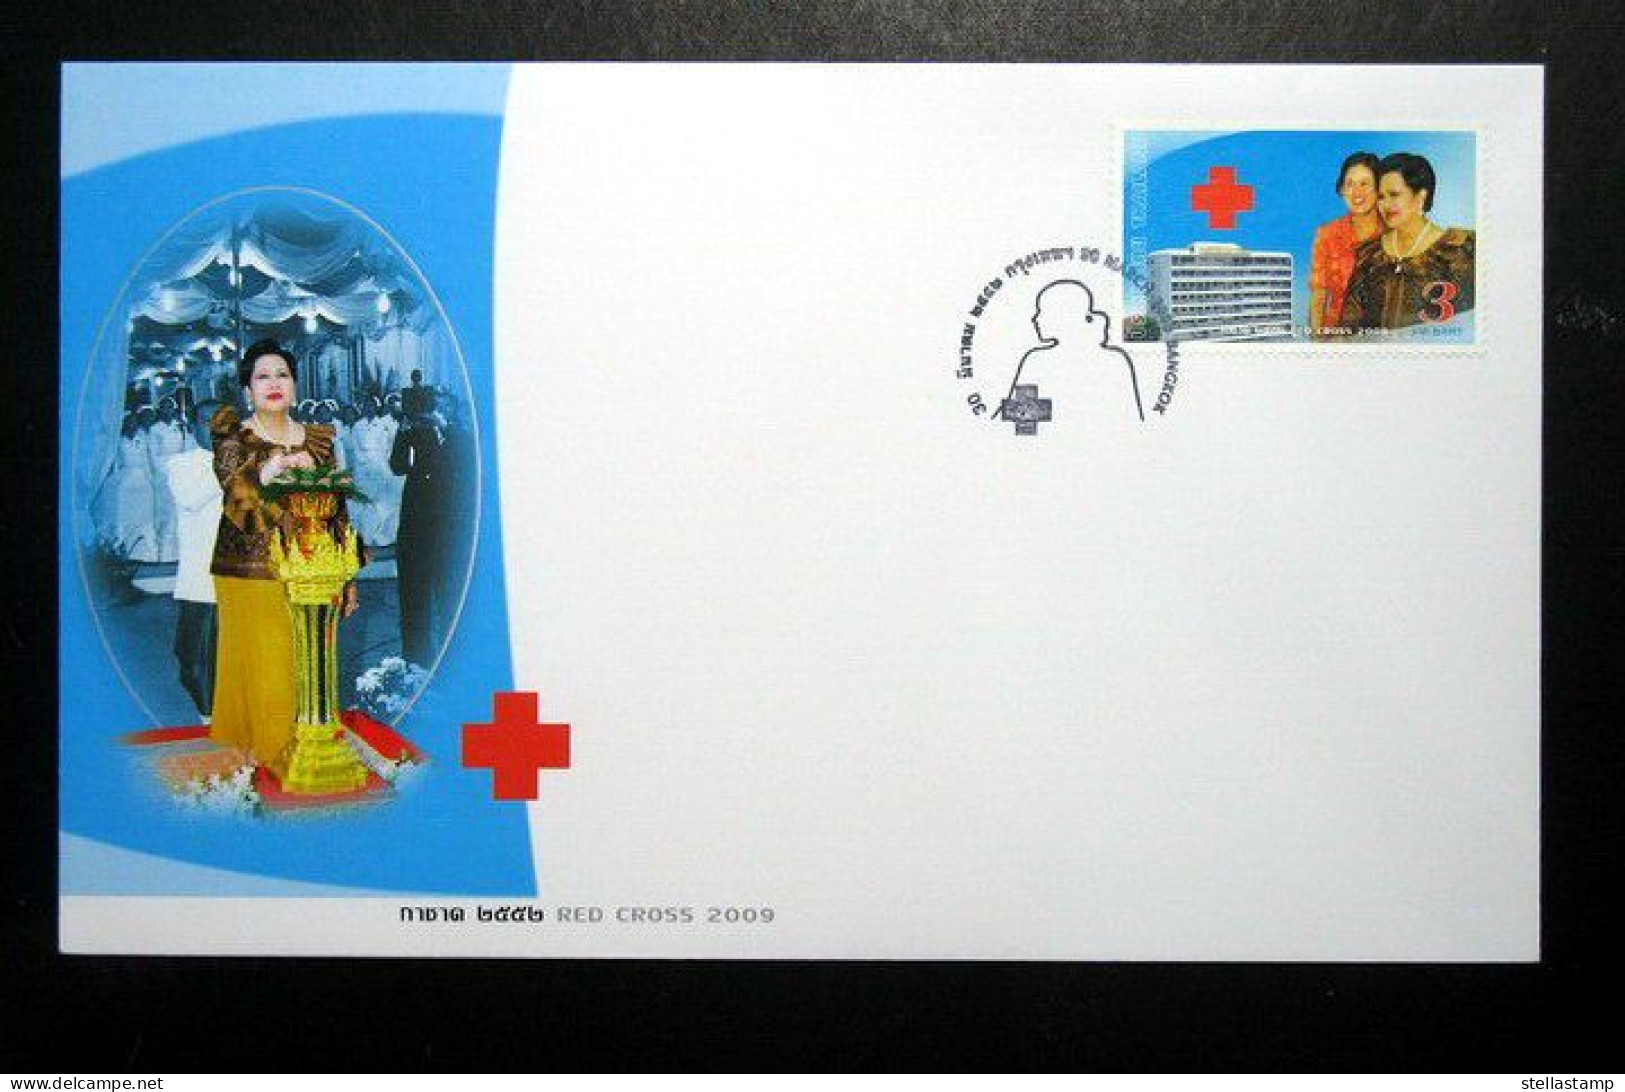 Thailand Stamp FDC 2009 Red Cross - Queen Sirikit Centre Breast Cancer - Thailand